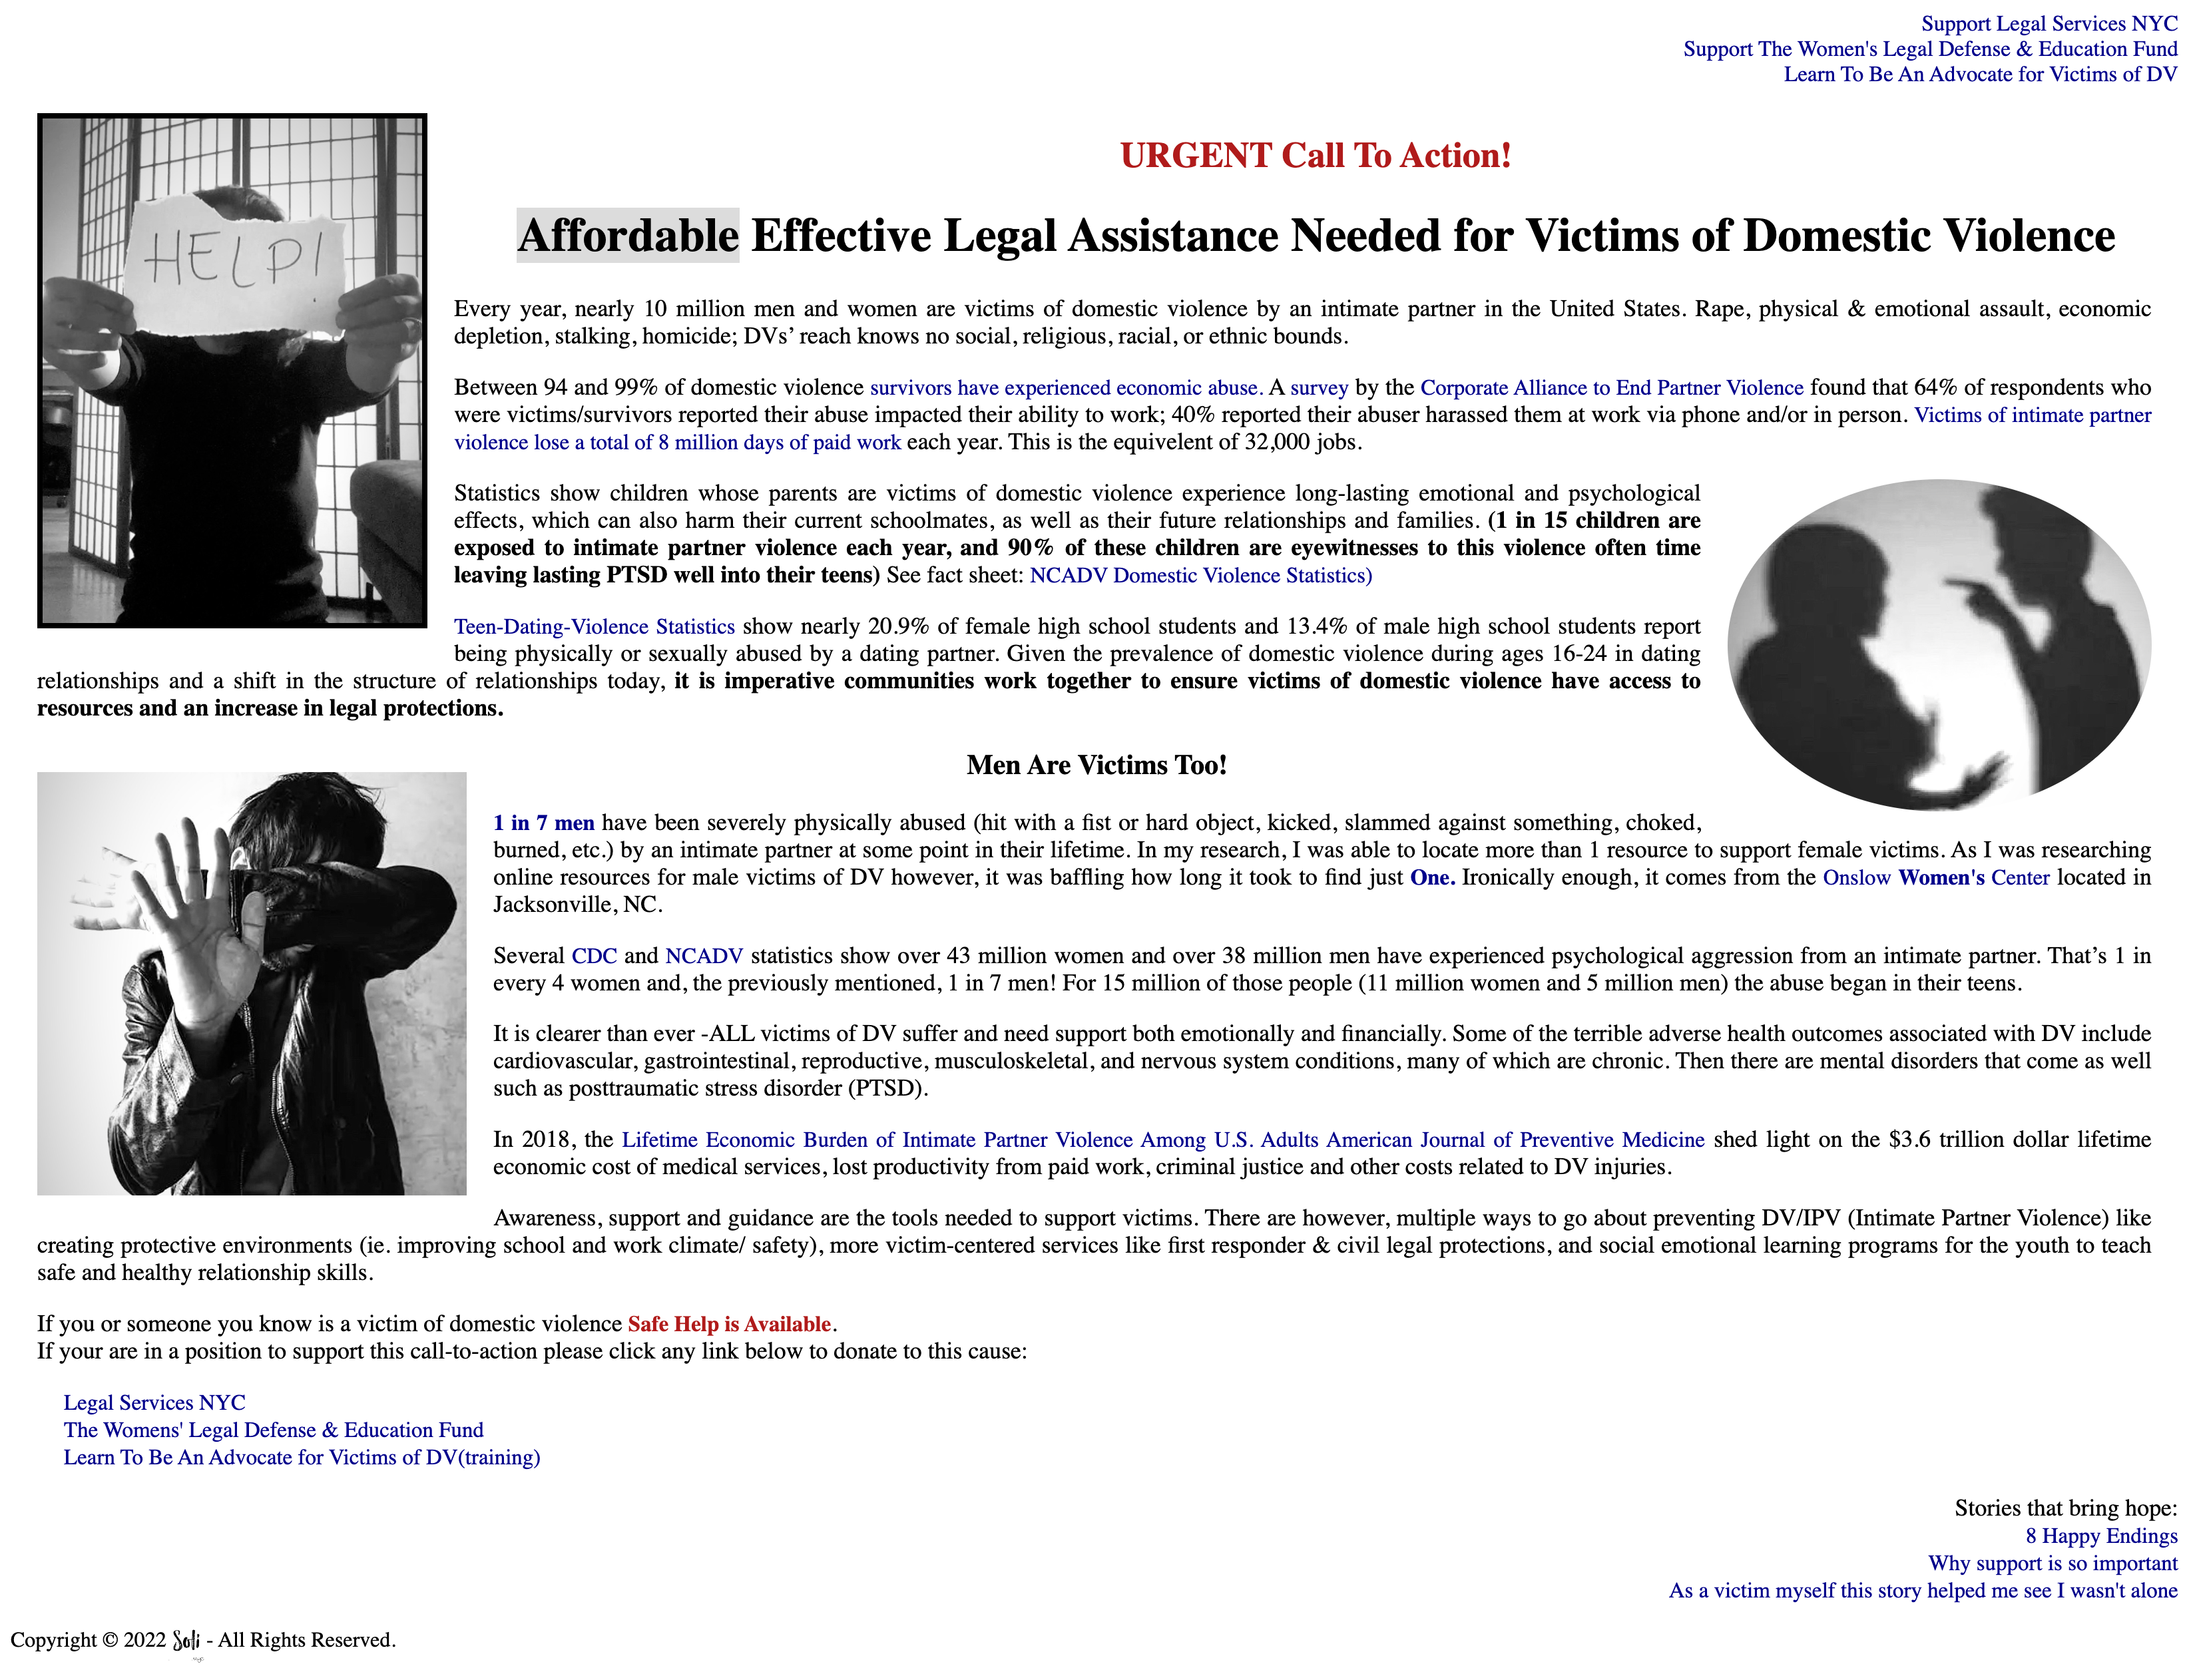 Domestic Violence: Call-To-Action responsive design created using HTML & CSS